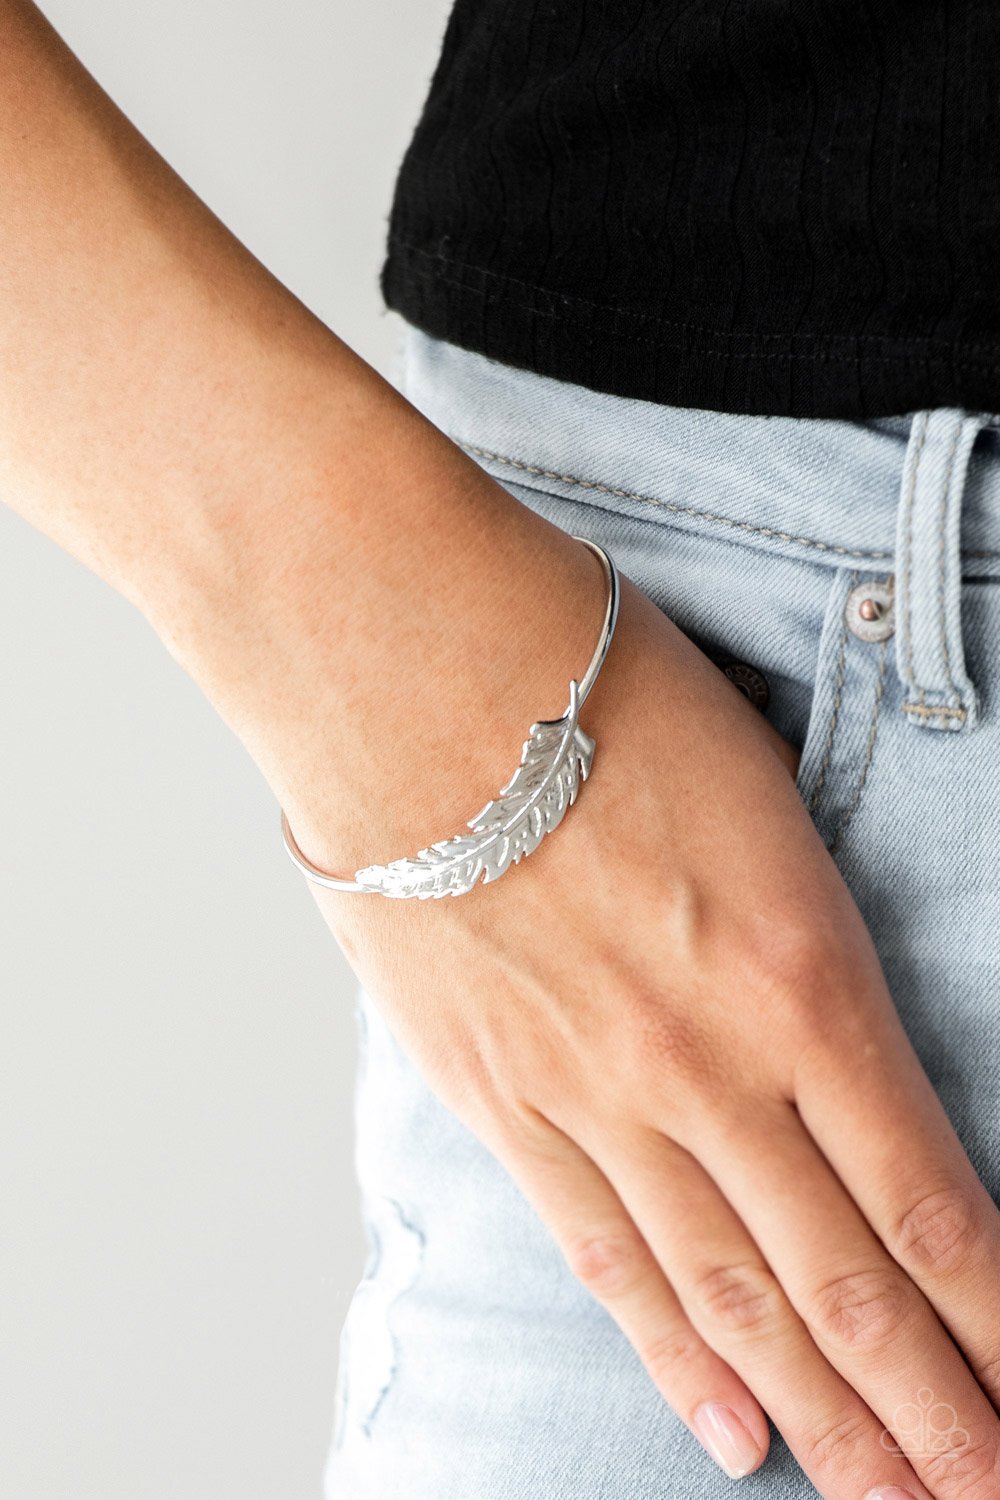 How Do You Like This FEATHER - Silver Bracelet